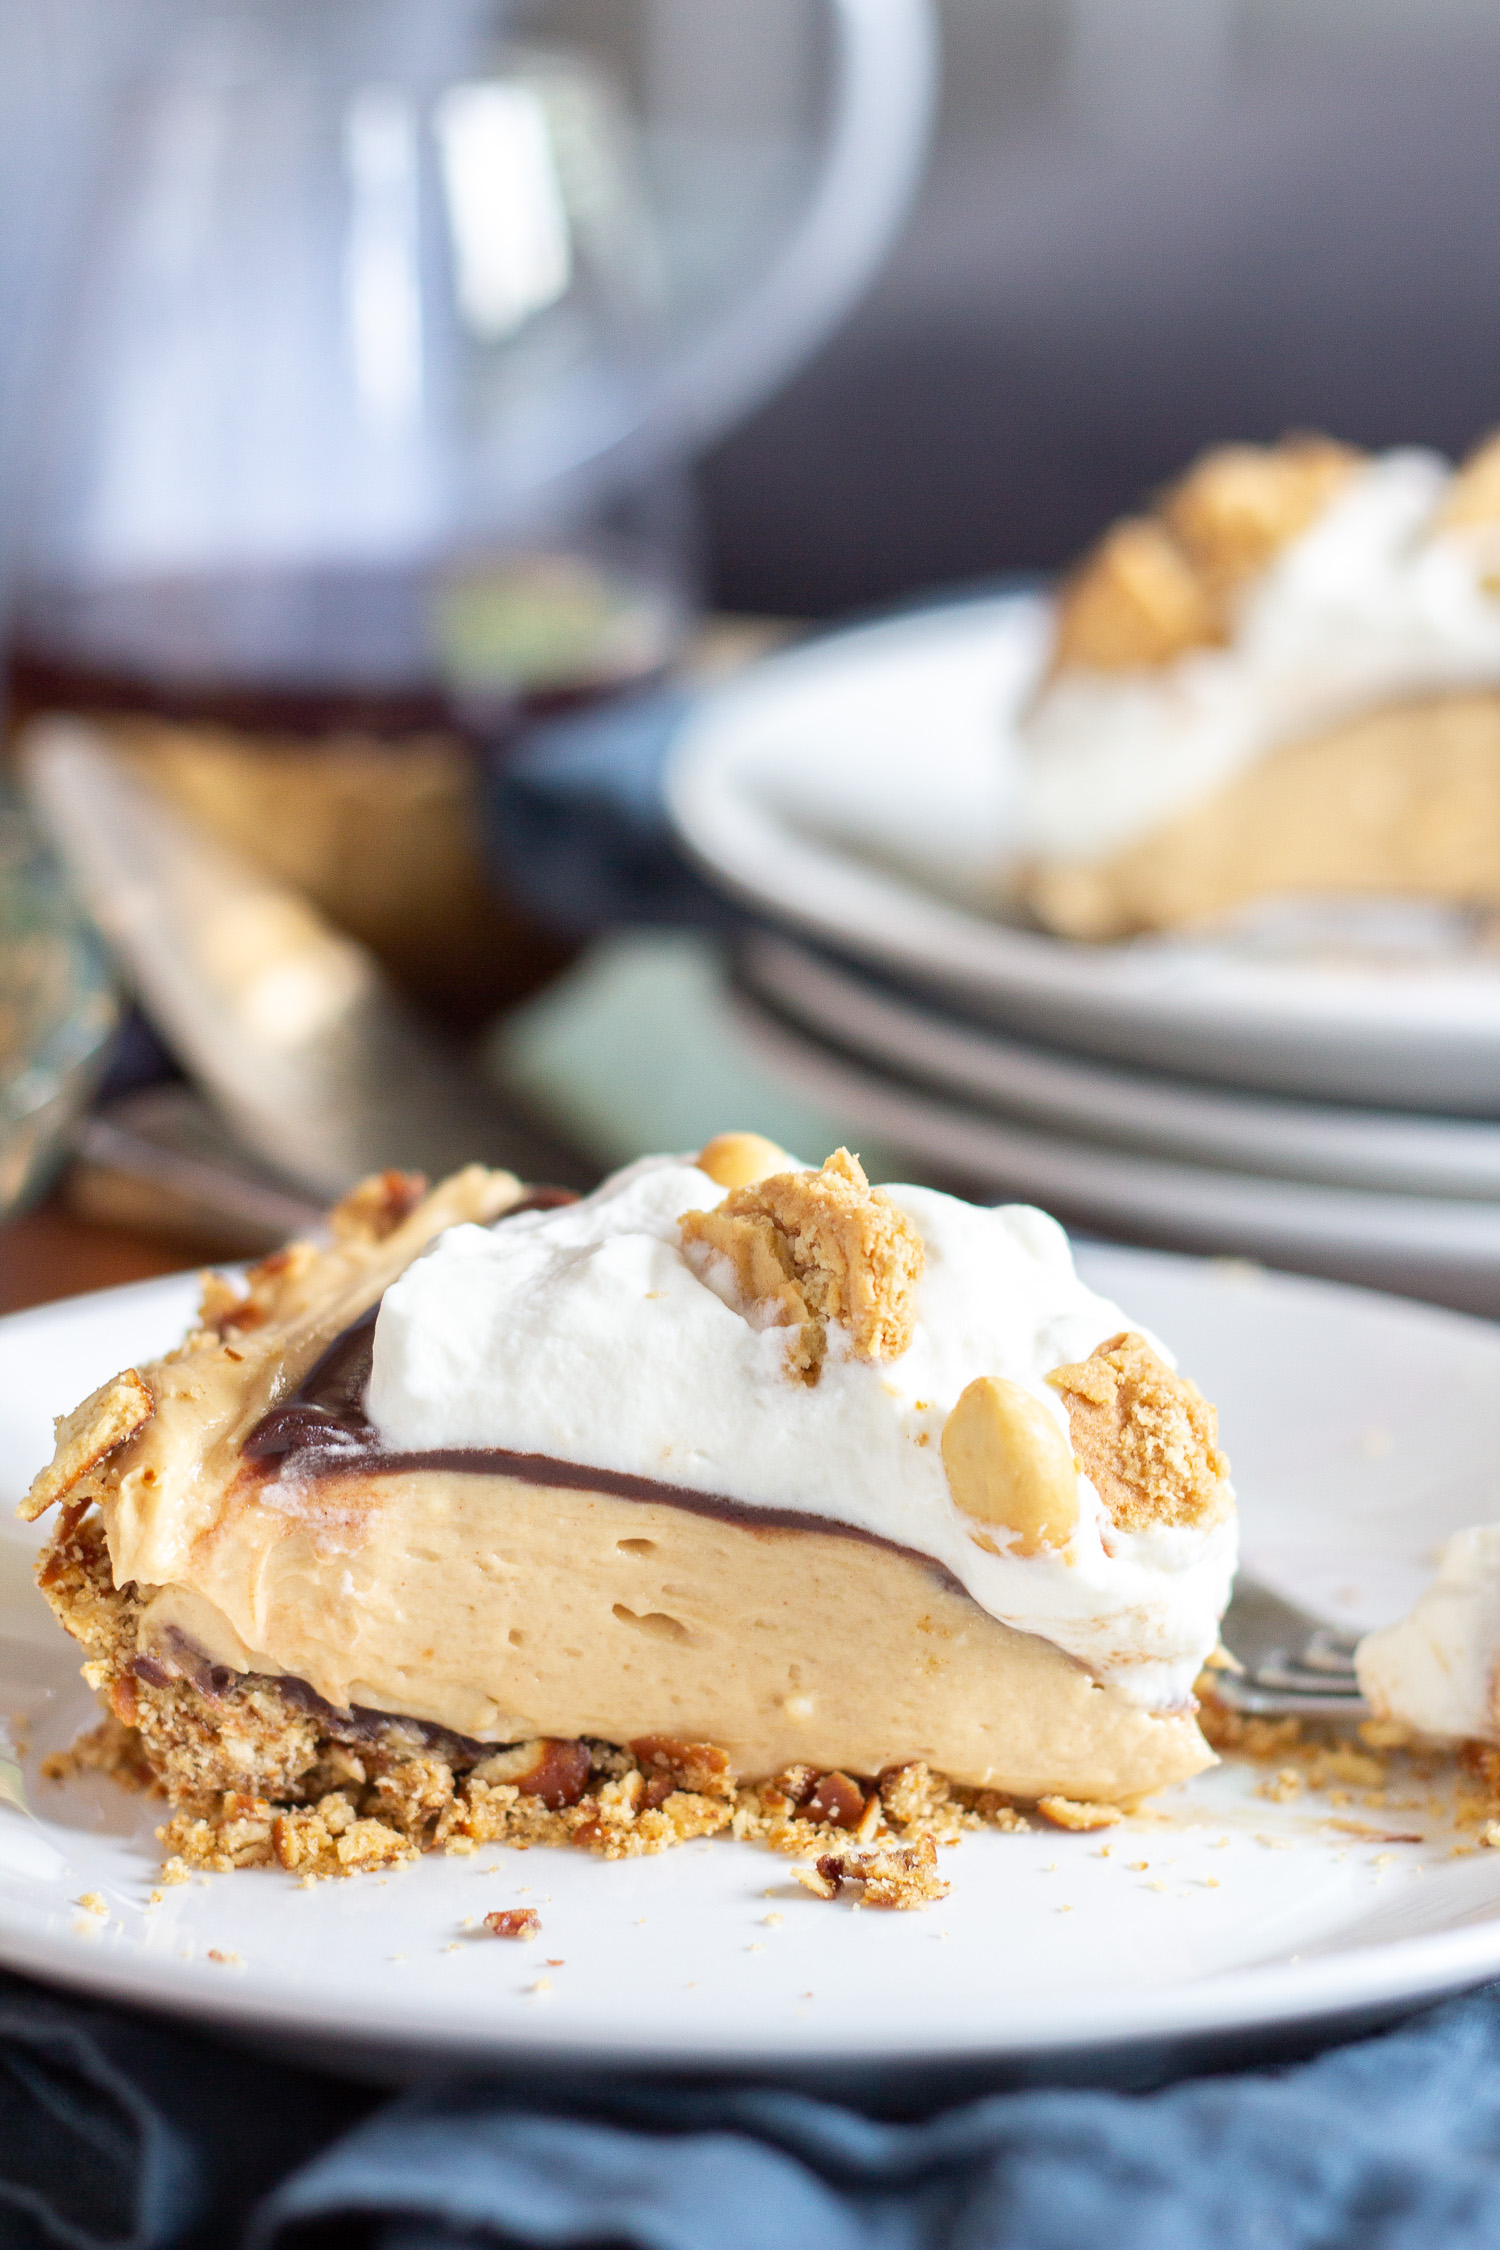 Chocolate Peanut Butter Pie | An Easy Recipe for Peanut Butter Pie with ...